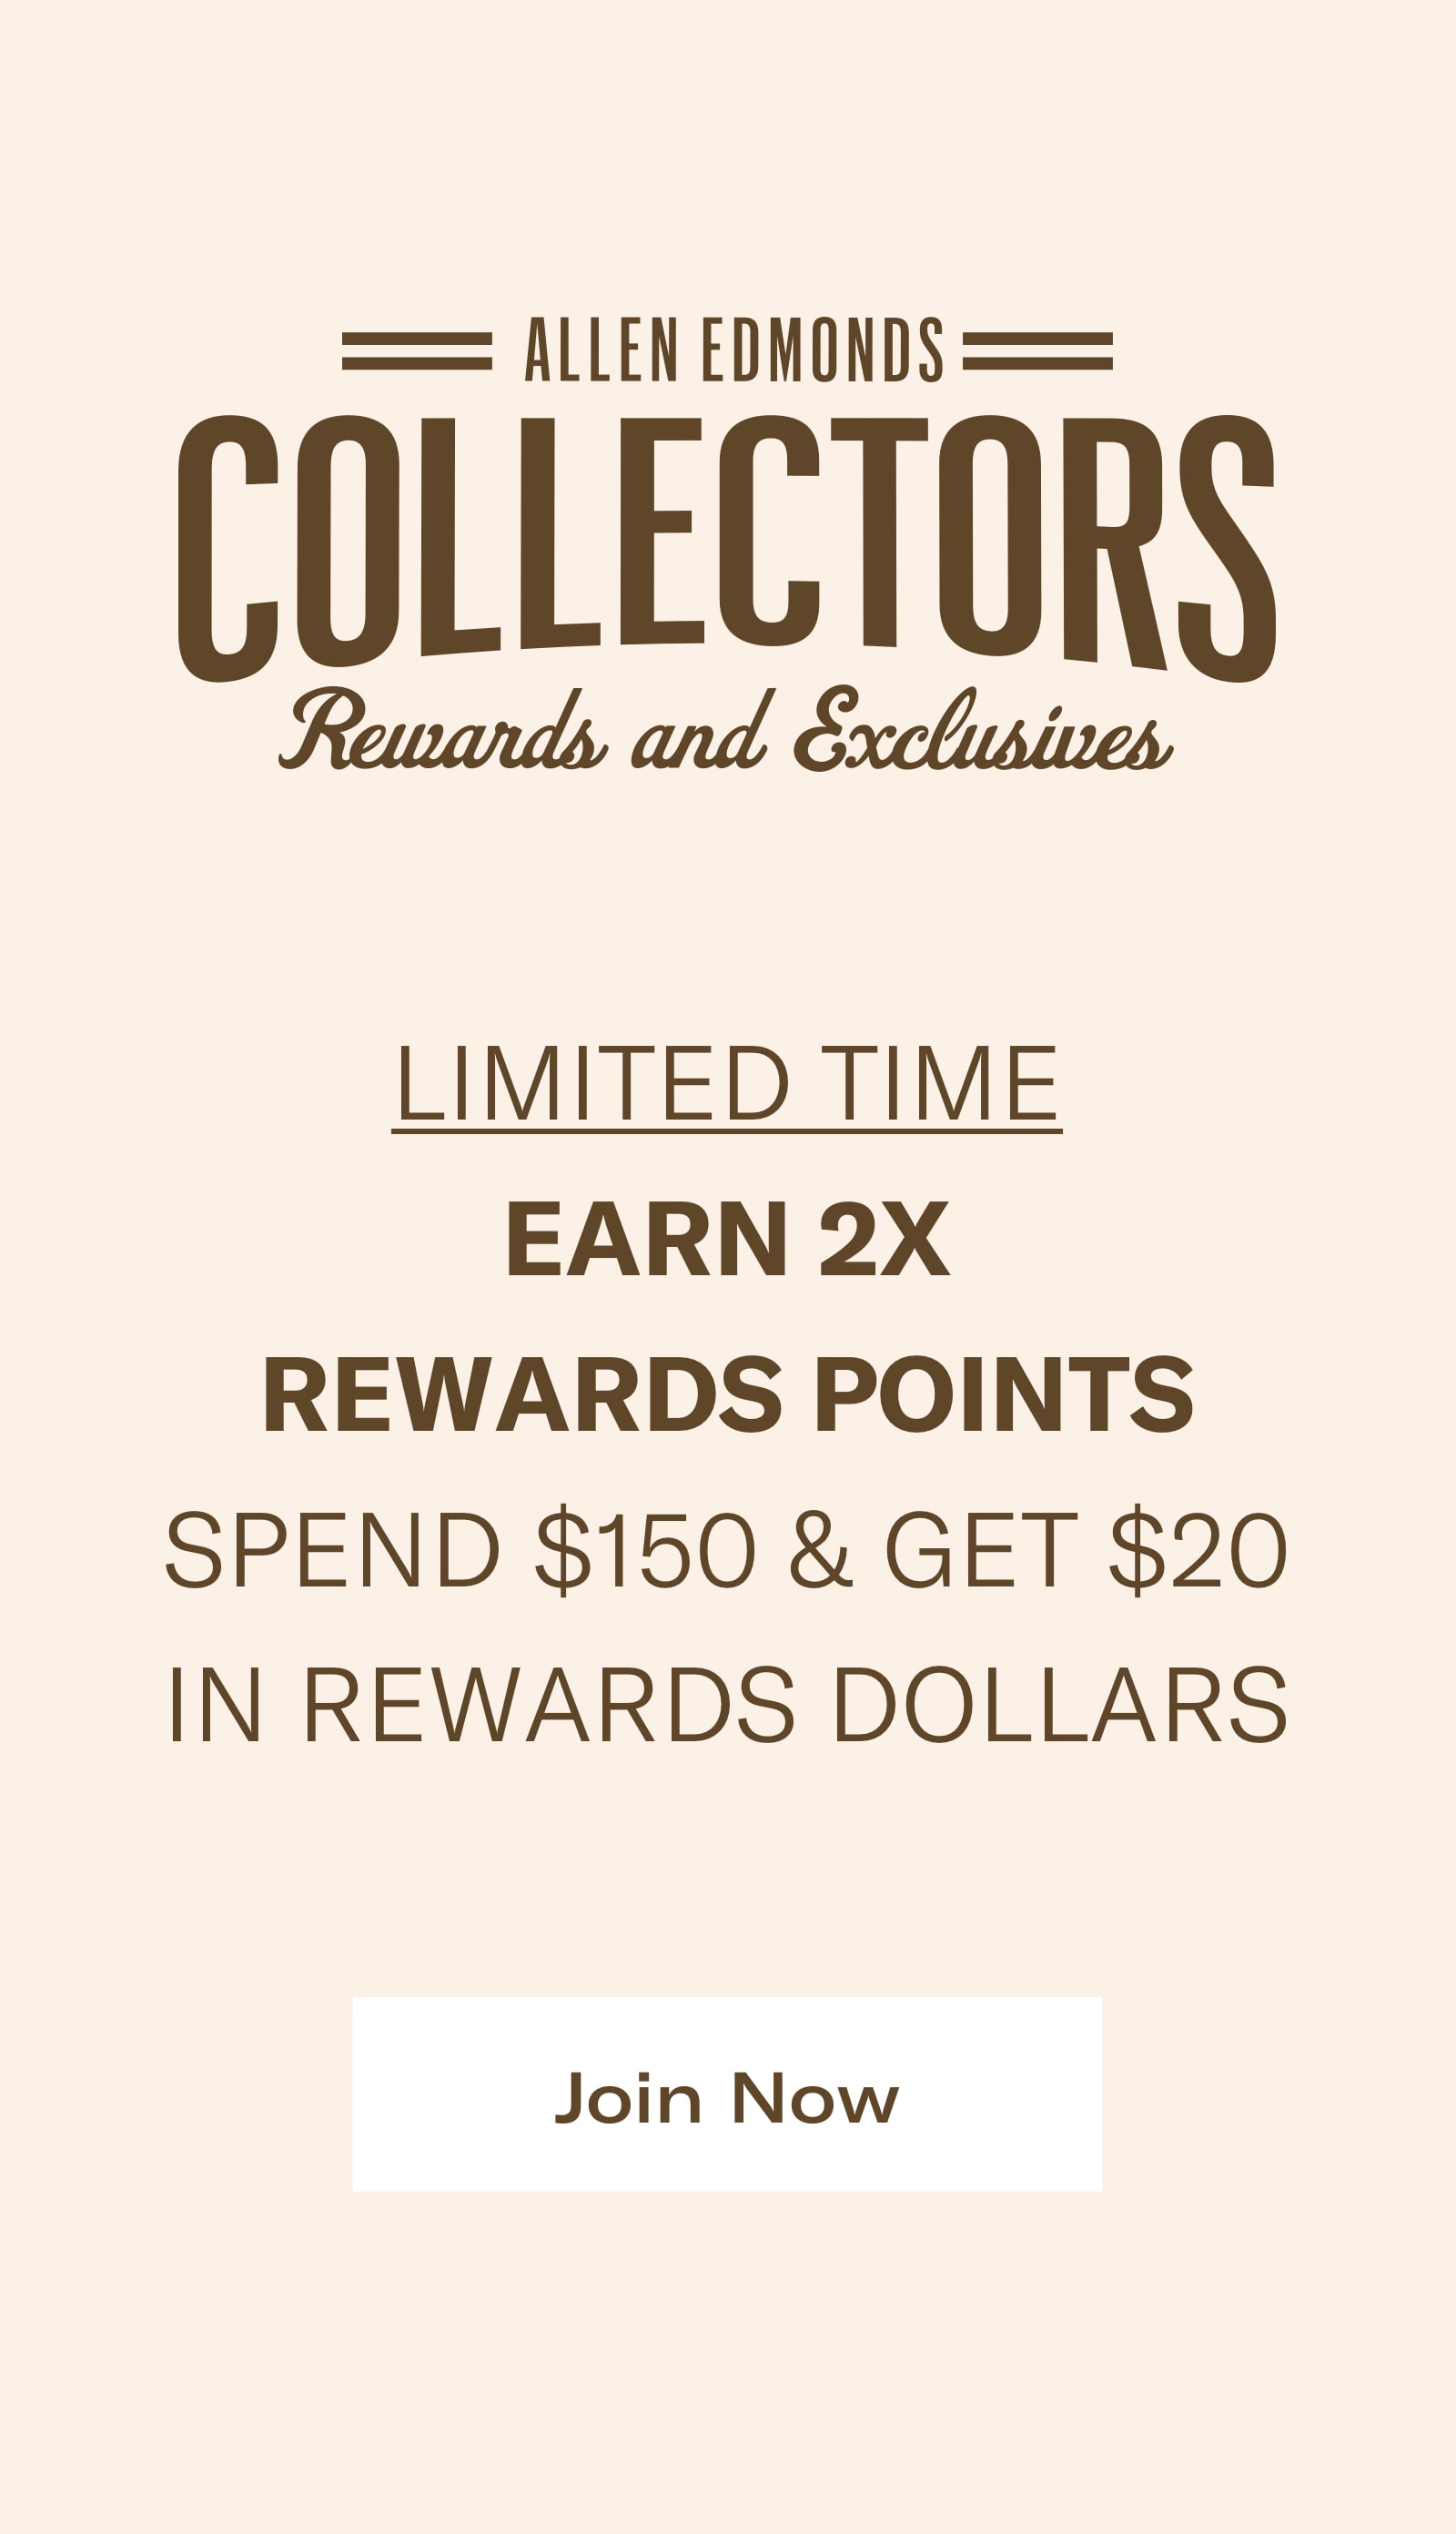 2X Bonus Points: 2 points earned for every $1 spent for Collectors. 